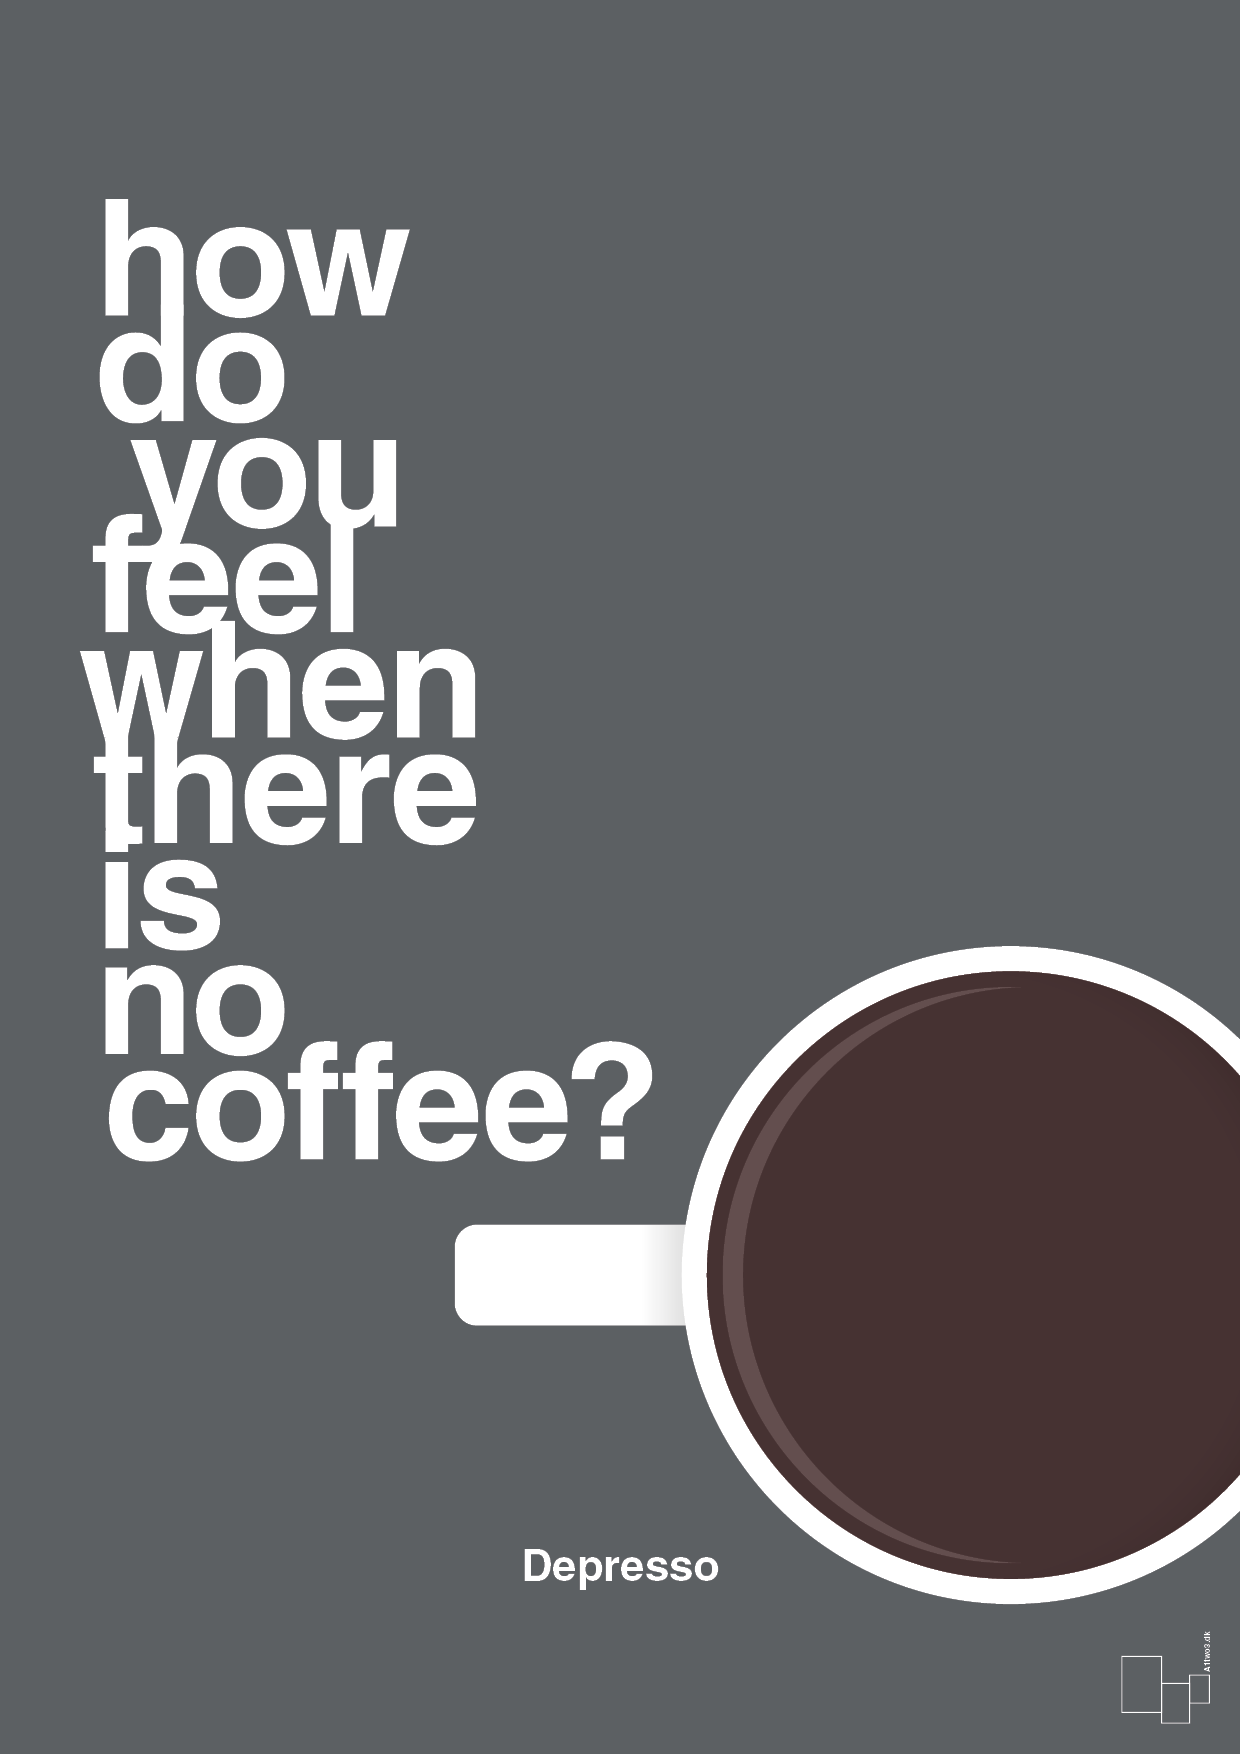 how do you feel when there is no coffee? depresso - Plakat med Mad & Drikke i Graphic Charcoal